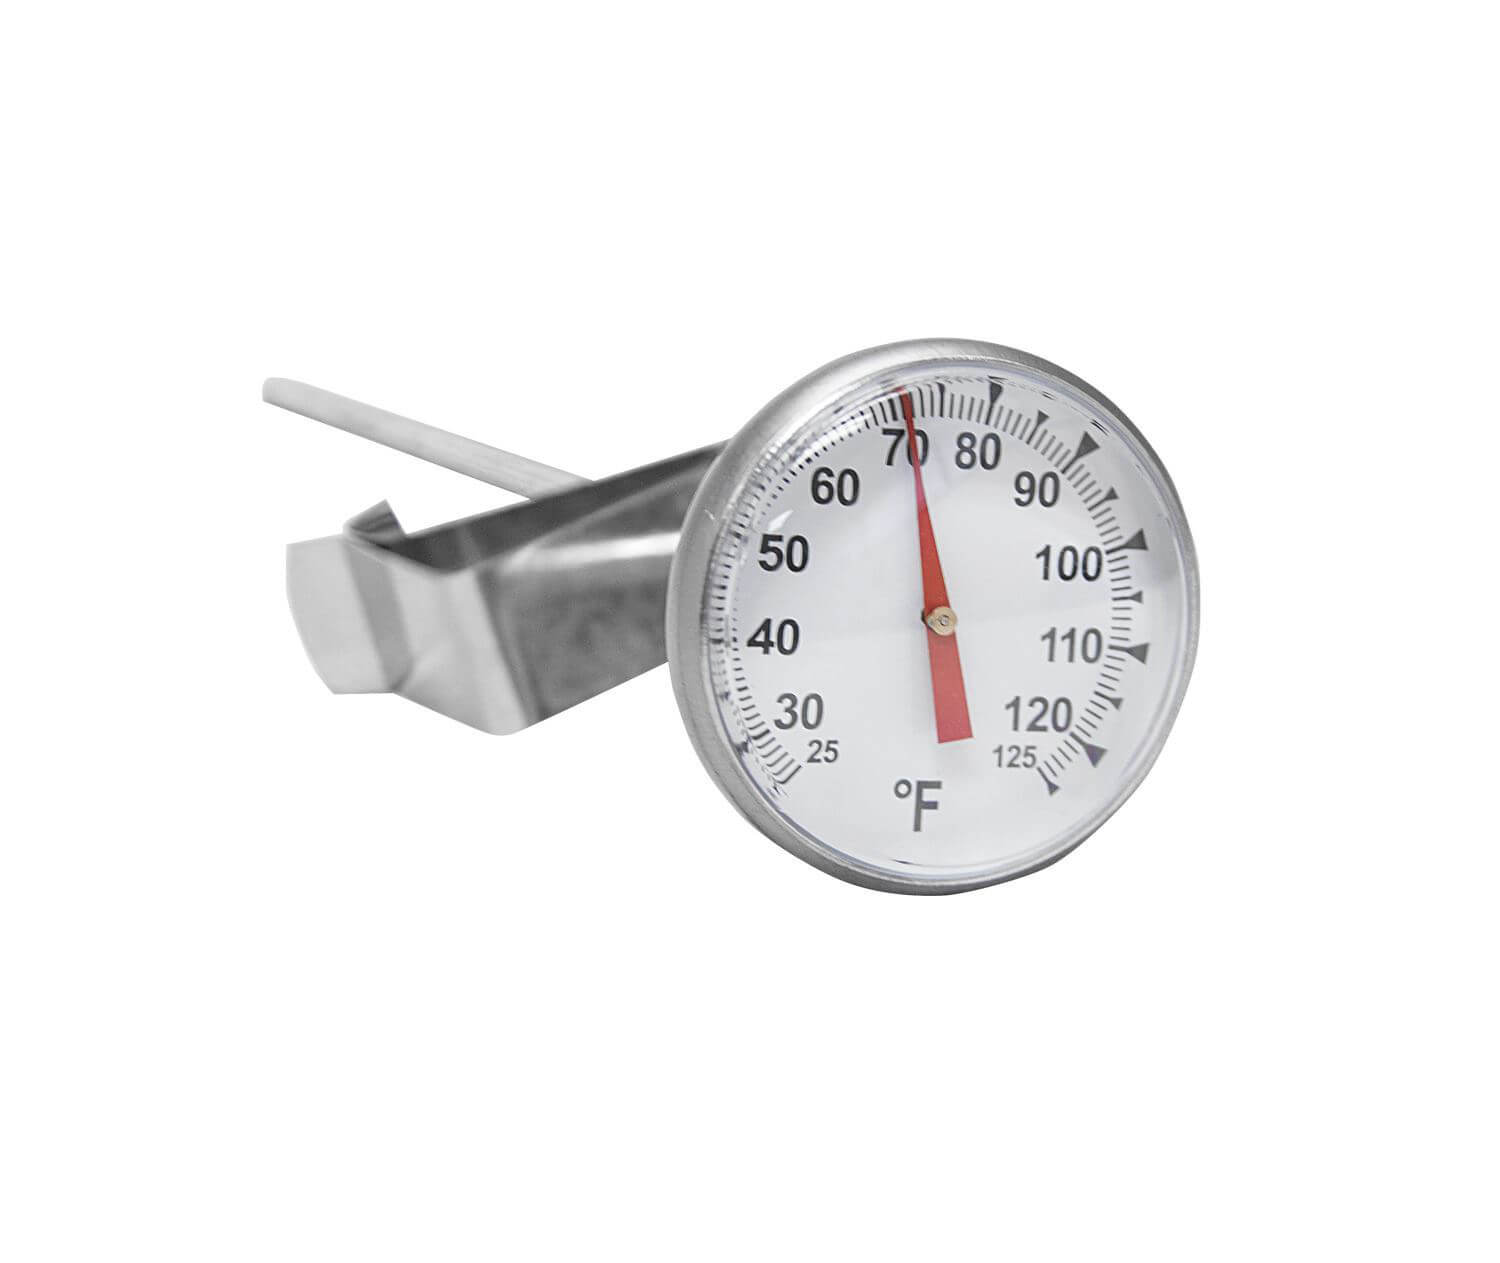 5 inch Wall or Flush Mount Direct Drive Dial Thermometer, 50B